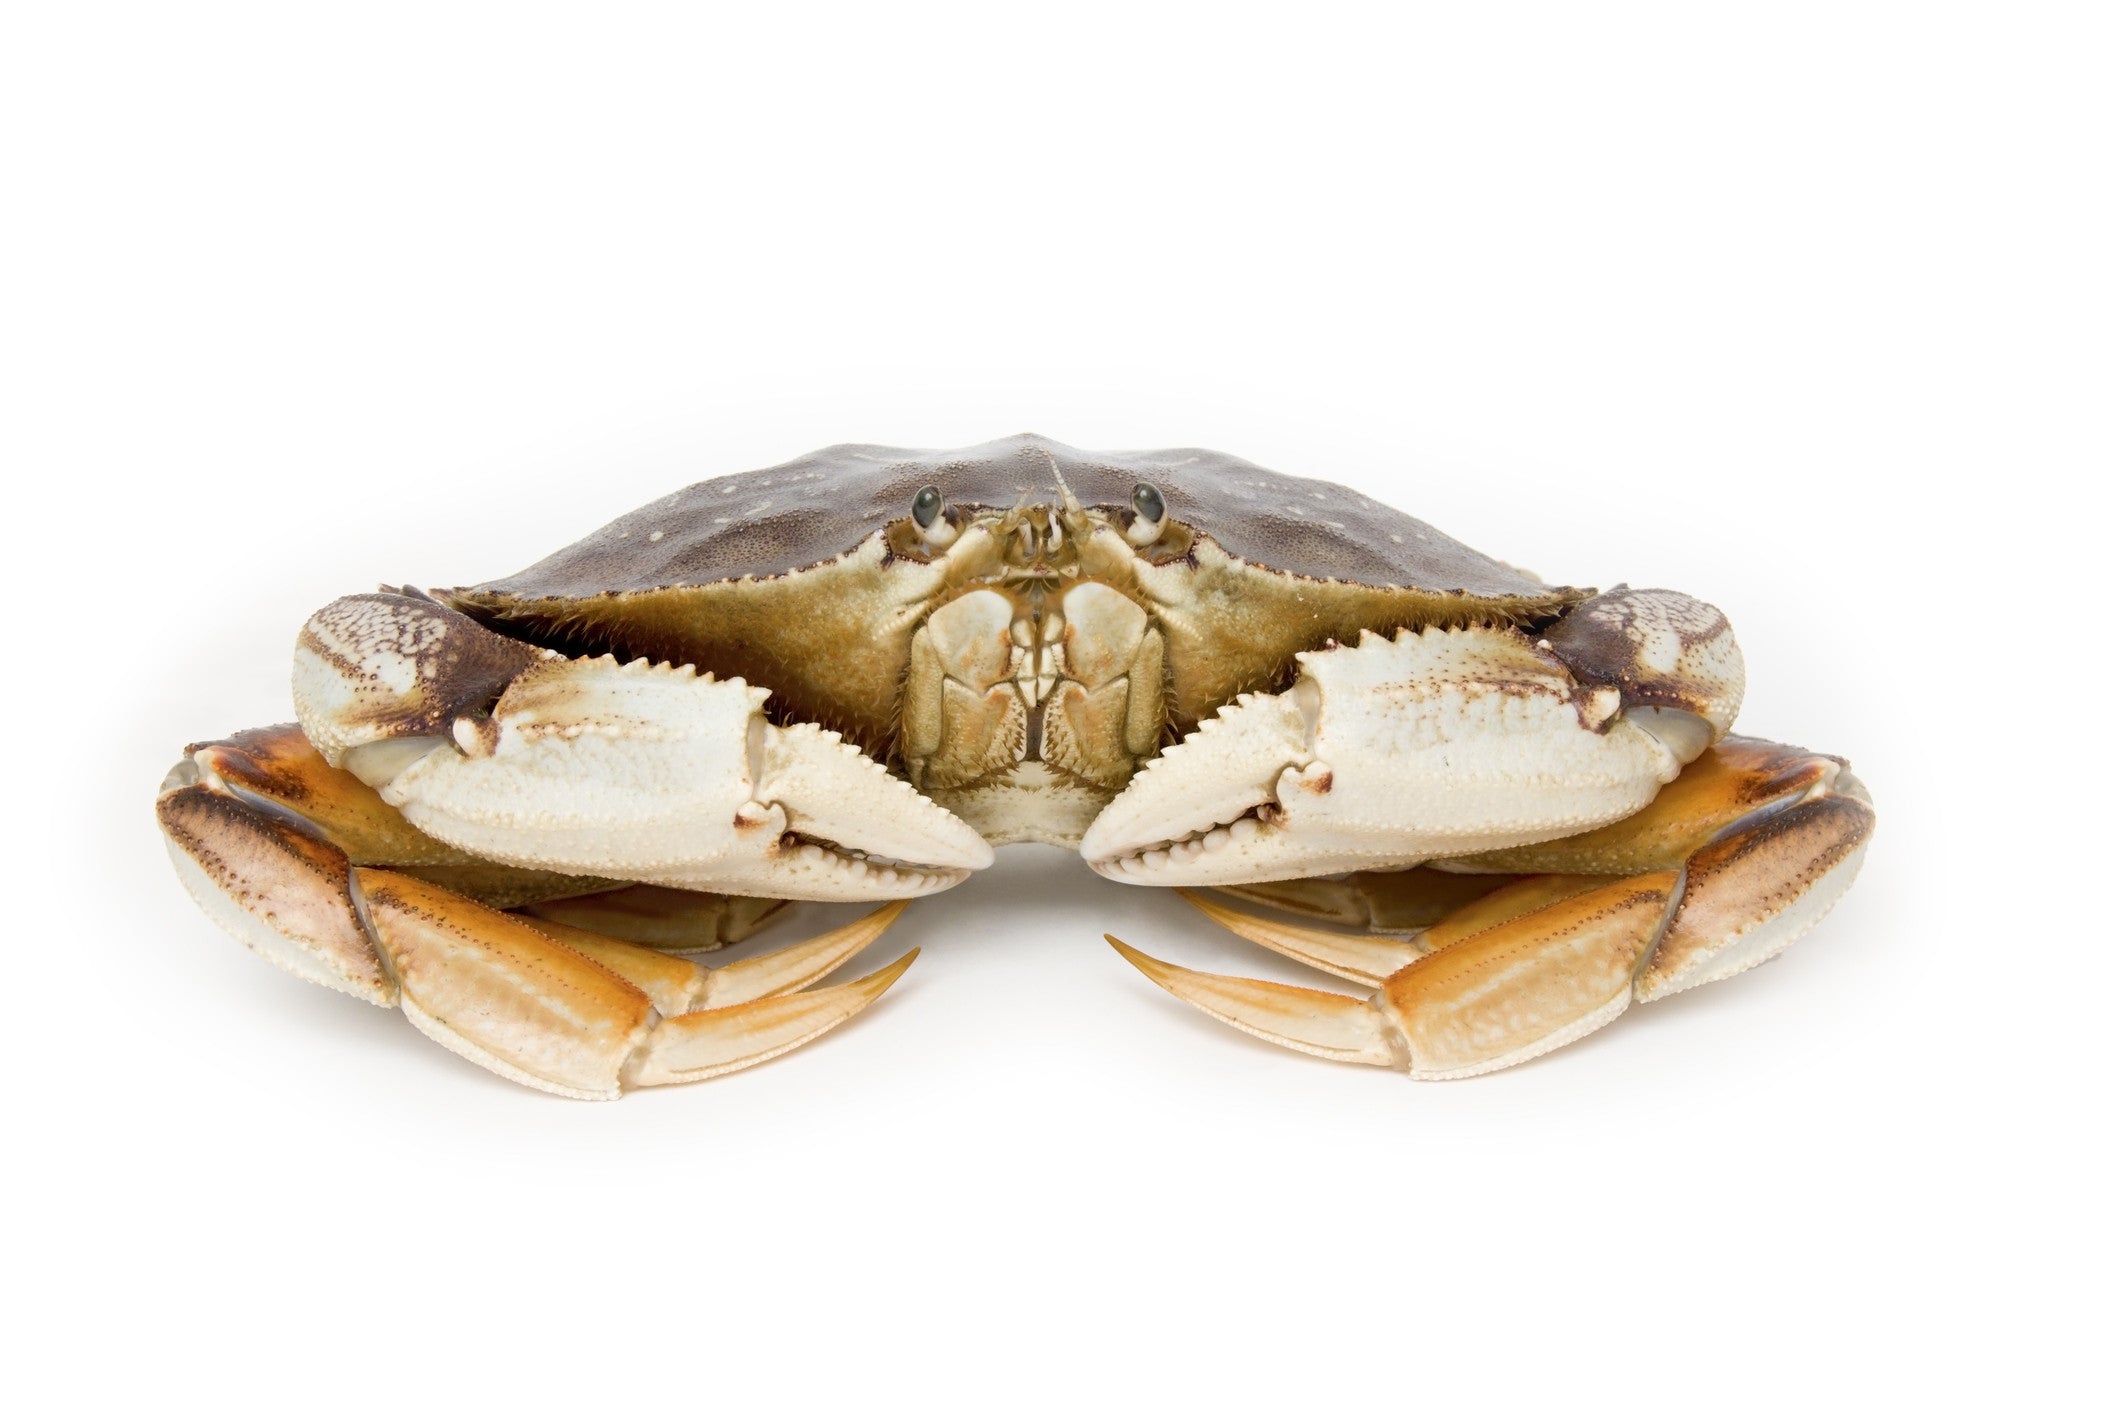 How To Store Live Dungeness Crab